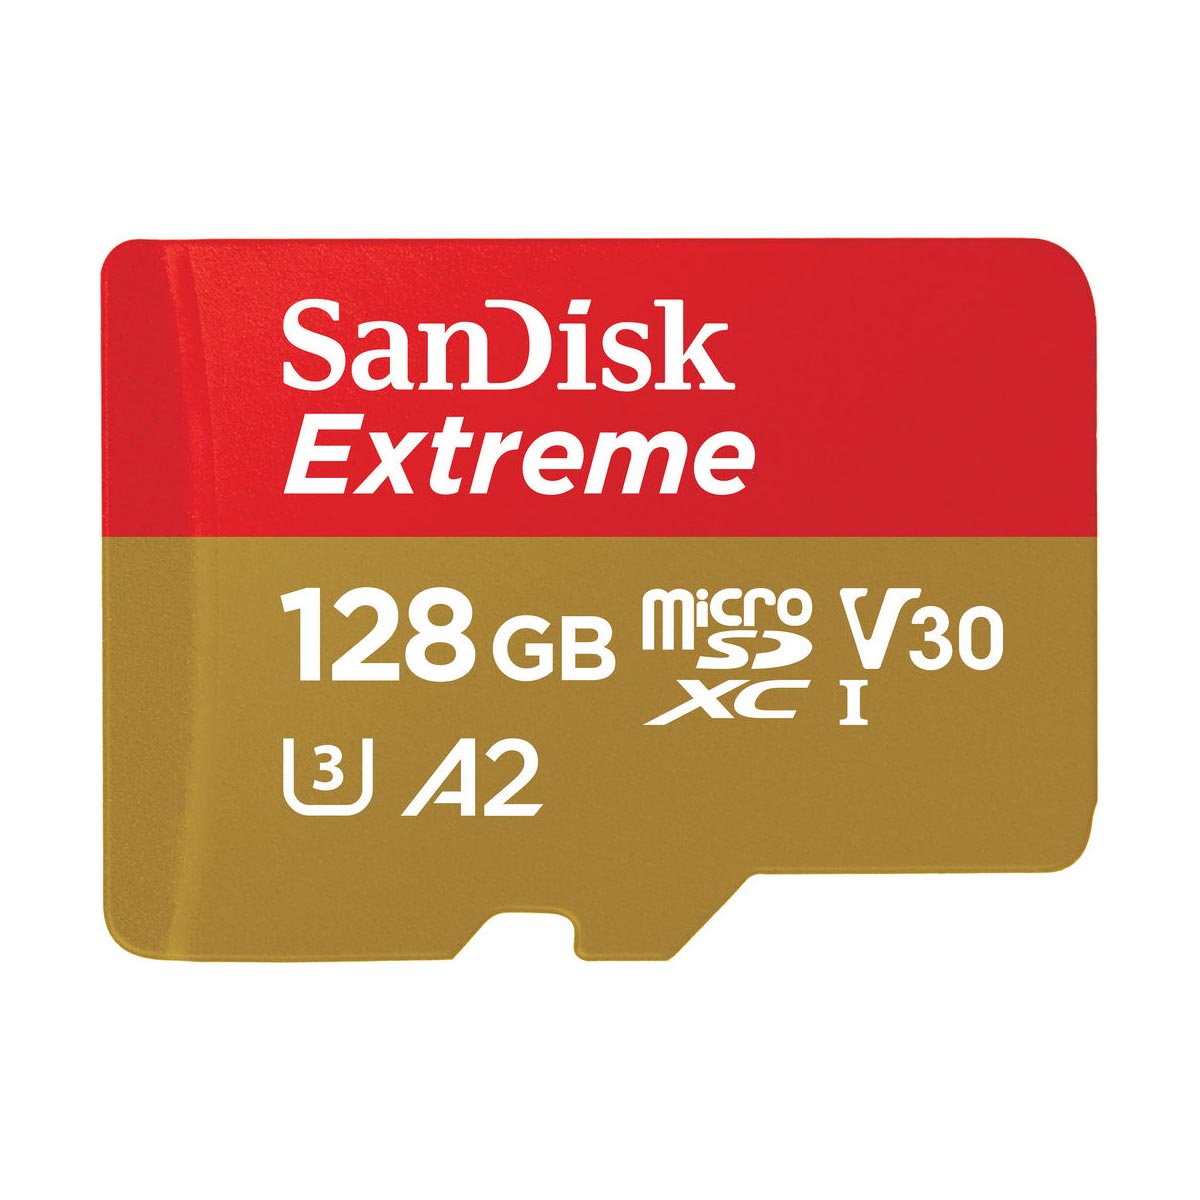 SanDisk 128GB Extreme UHS-I microSDXC (V30) 190mb/s Memory Card with SD Adapter